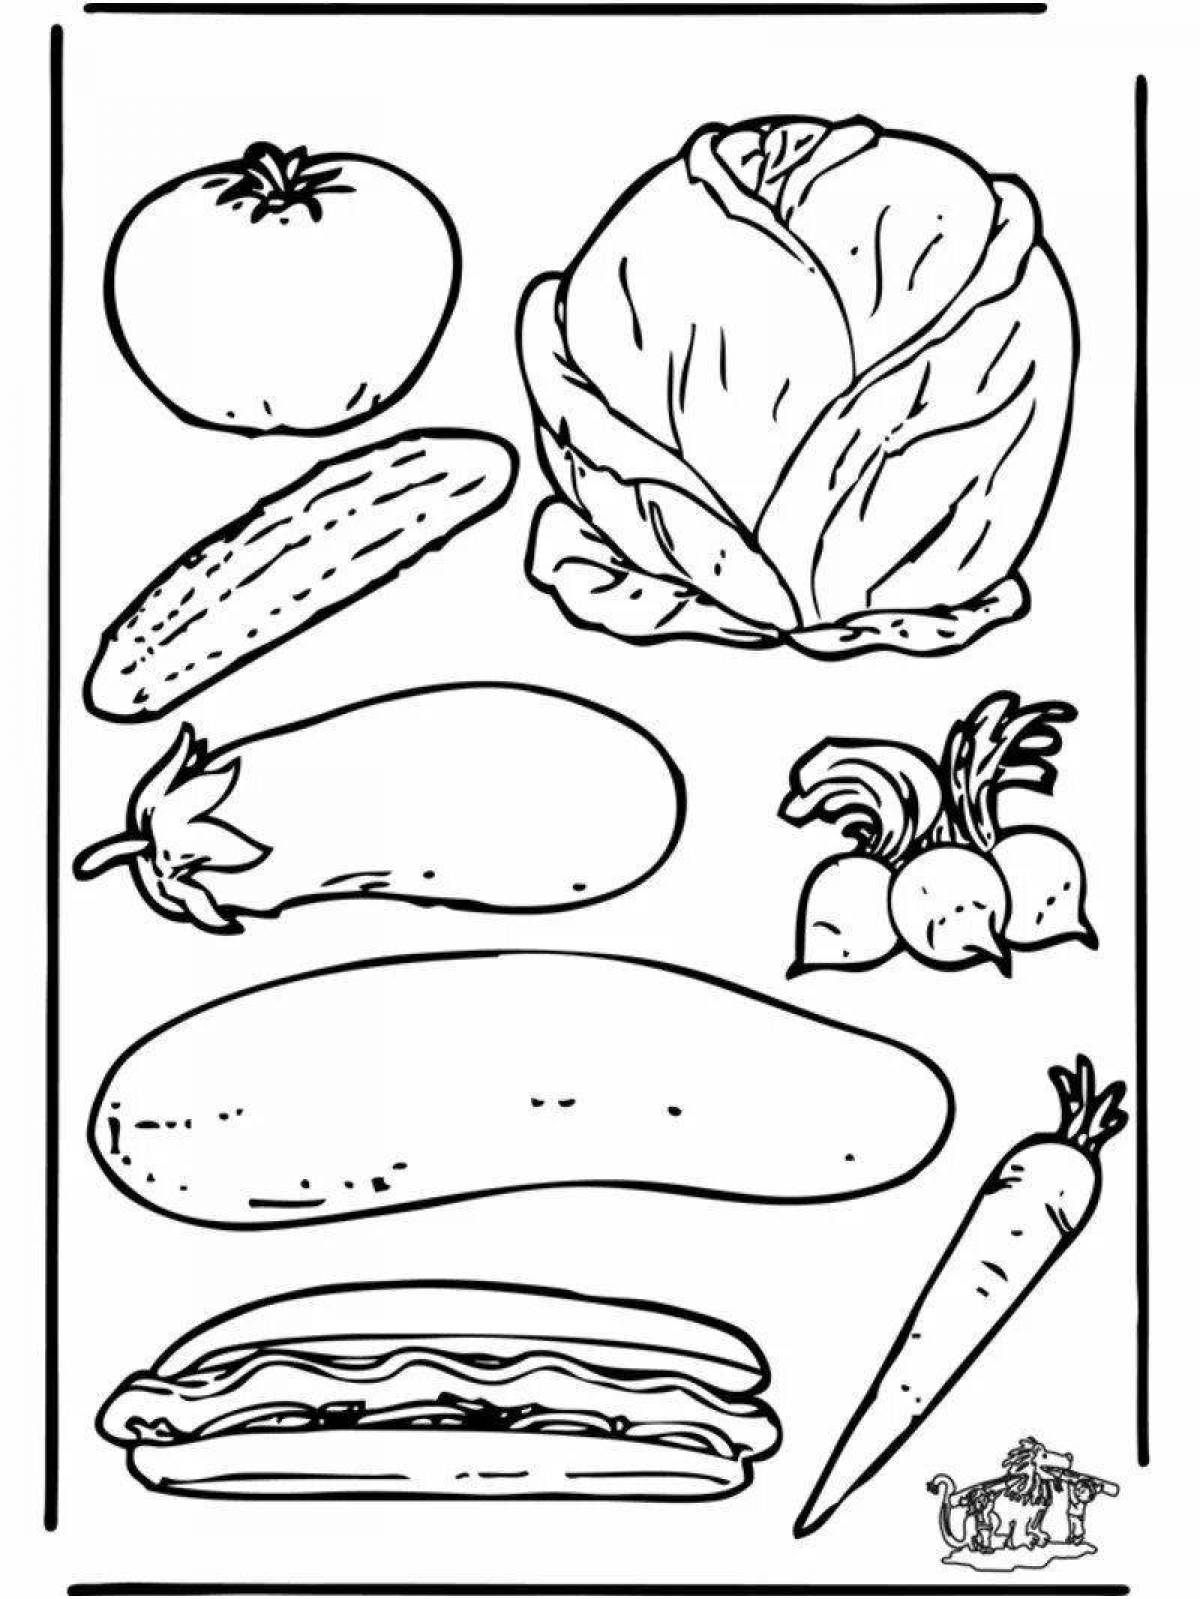 Colorful vegetable coloring book for 3 year olds